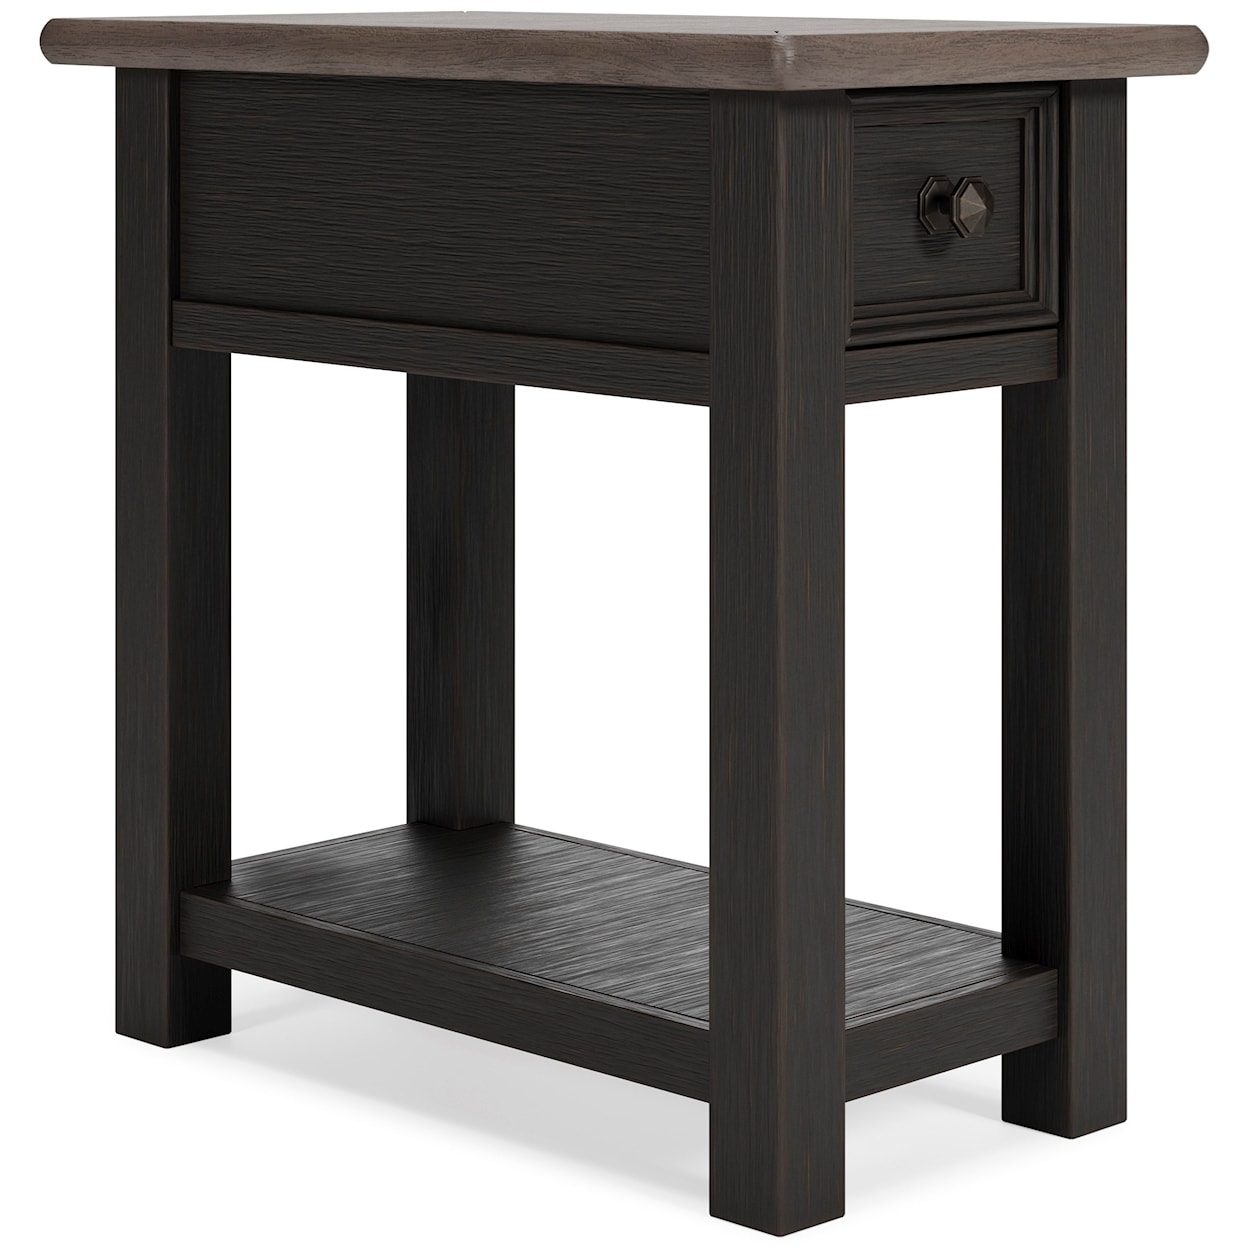 Ashley Furniture Signature Design Tyler Creek Chair Side End Table